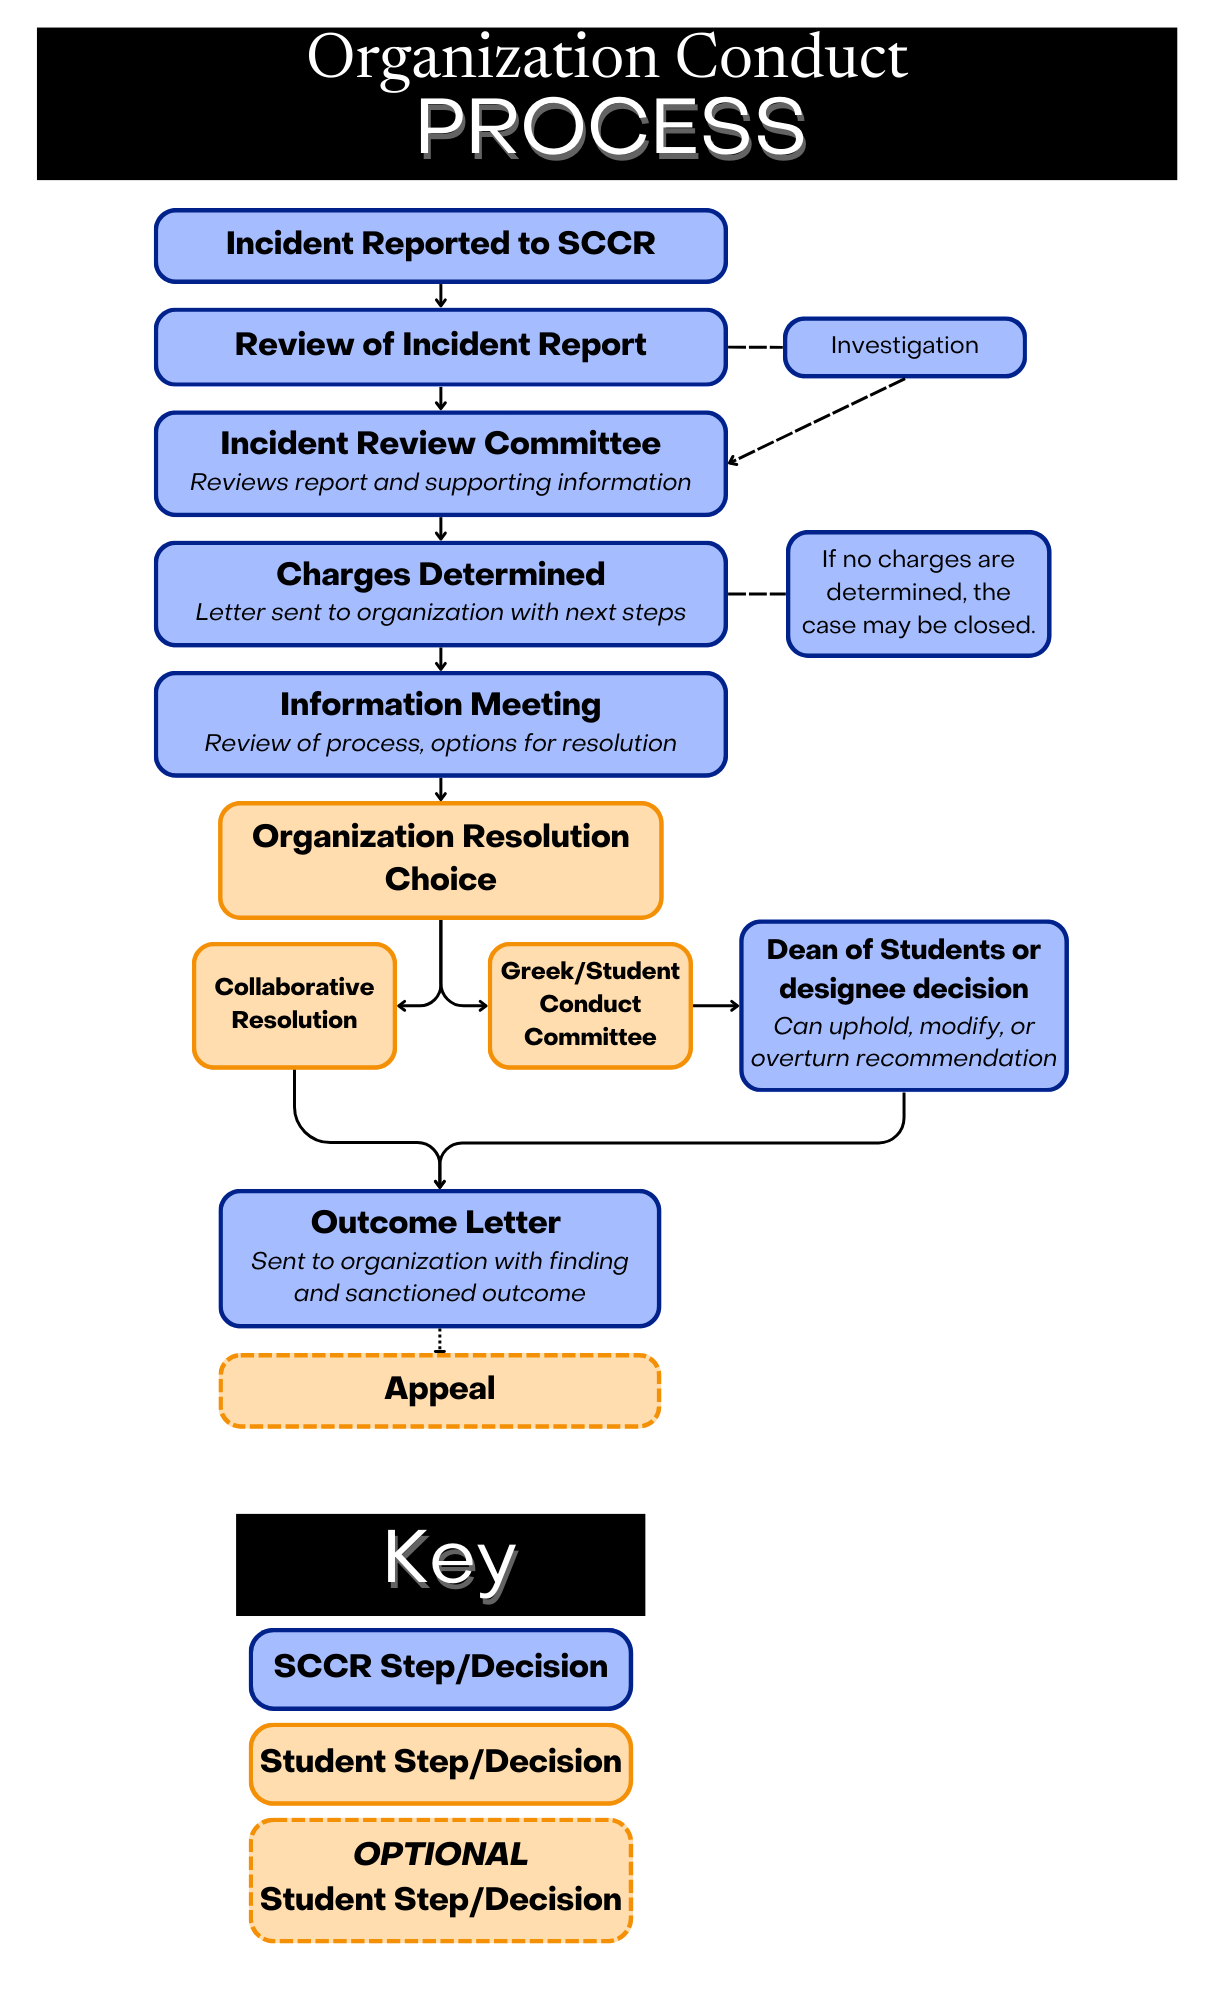 This is an image depicting the conduct process for social Greek letter student organizations, as explained in Student Conduct Code and Student Honor Code. In summary, once an incident is reported to the Student Conduct and Conflict Resolution (SCCR), it will go to the Incident Review Committee (IRC) for review of the incident report and the supporting information. The incident may need possible investigation before going to the IRC. After the IRC reviews, SCCR will make the decision to charge. If they decide not to charge, the case is closed. If they decide to charge, a charge letter will be issued out. Then an informational meeting will be scheduled. From the informational meeting, the proceedings will either follow shared governance or go to the Greek Conduct Committee. Through shared governance, a decision will be made regarding the case. Decisions can be appealed. Through the Greek Conduct Committee, a formal hearing will be scheduled. After the hearing, a recommendation will be sent to the Dean of Students or designee for a decision. Decisions can be appealed.